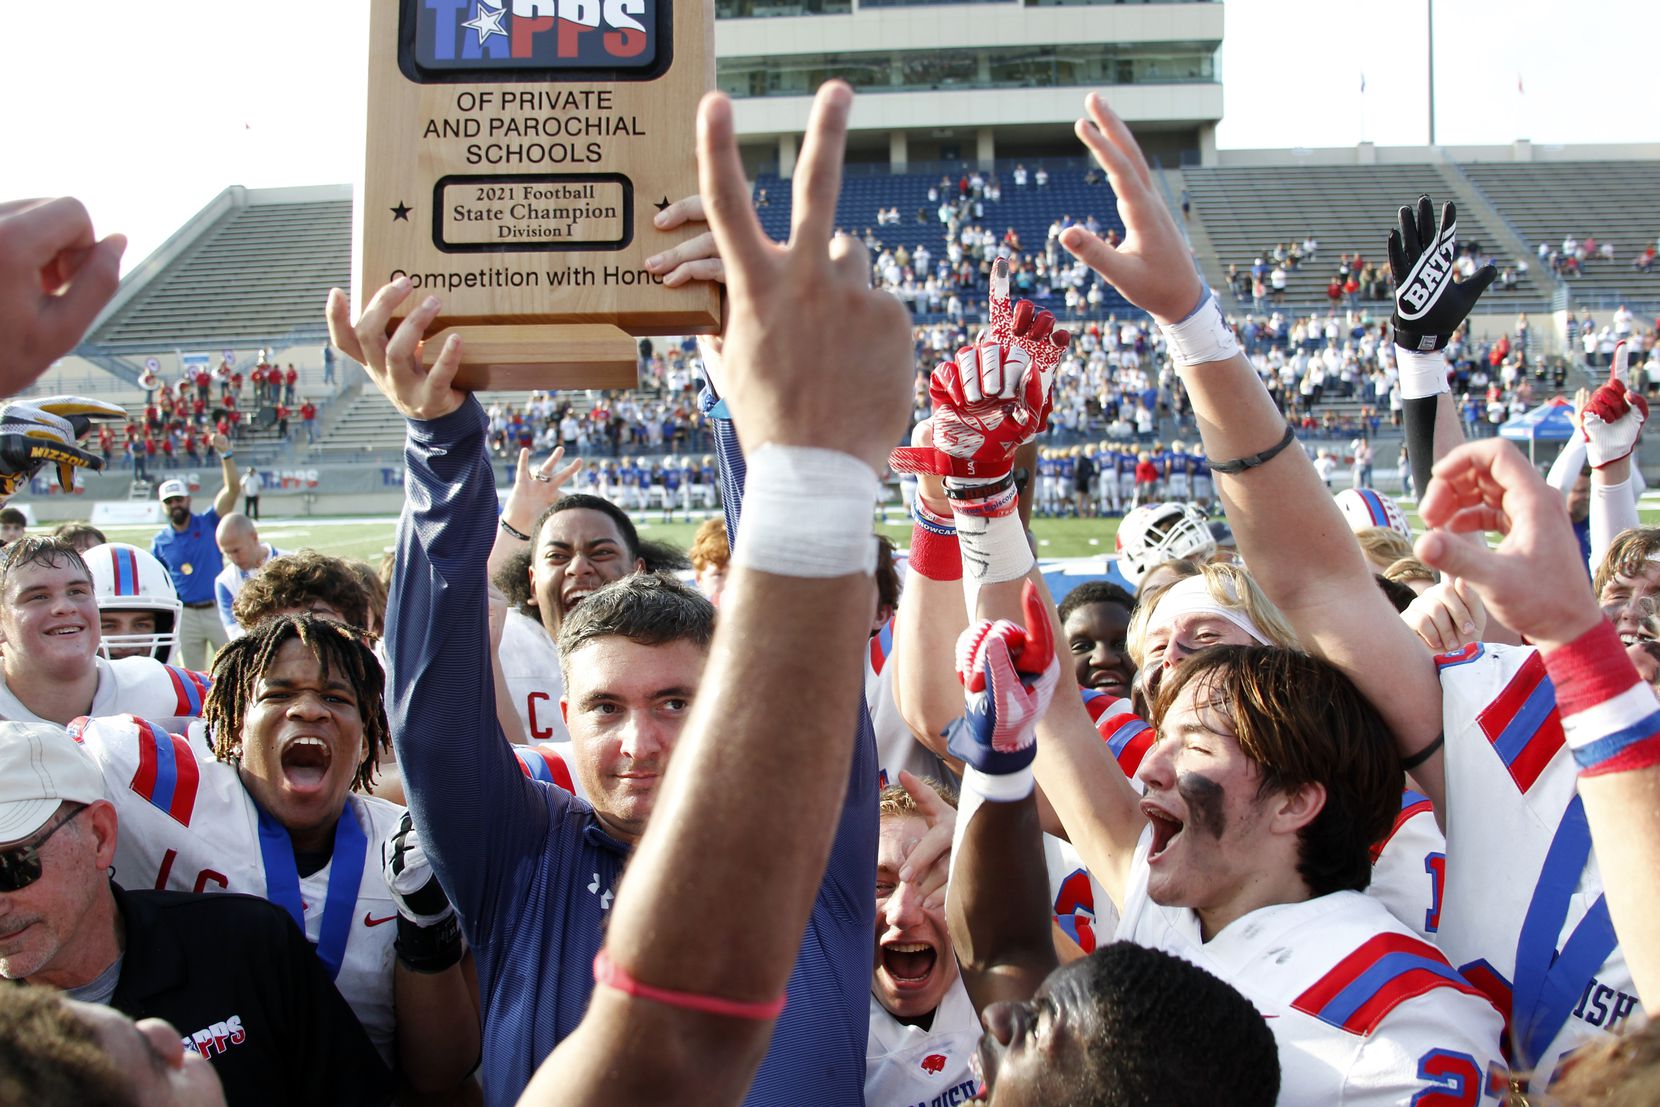 Parish Episcopal head football coach Daniel Novakov hoists the state title trophy to the excitement of his players following their 56-17 victory over Midland Christian in the championship game. The two teams played their TAPPS Division 1 state championship football game at Waco ISD Stadium in Waco on December 4, 2021. (Steve Hamm/ Special Contributor)